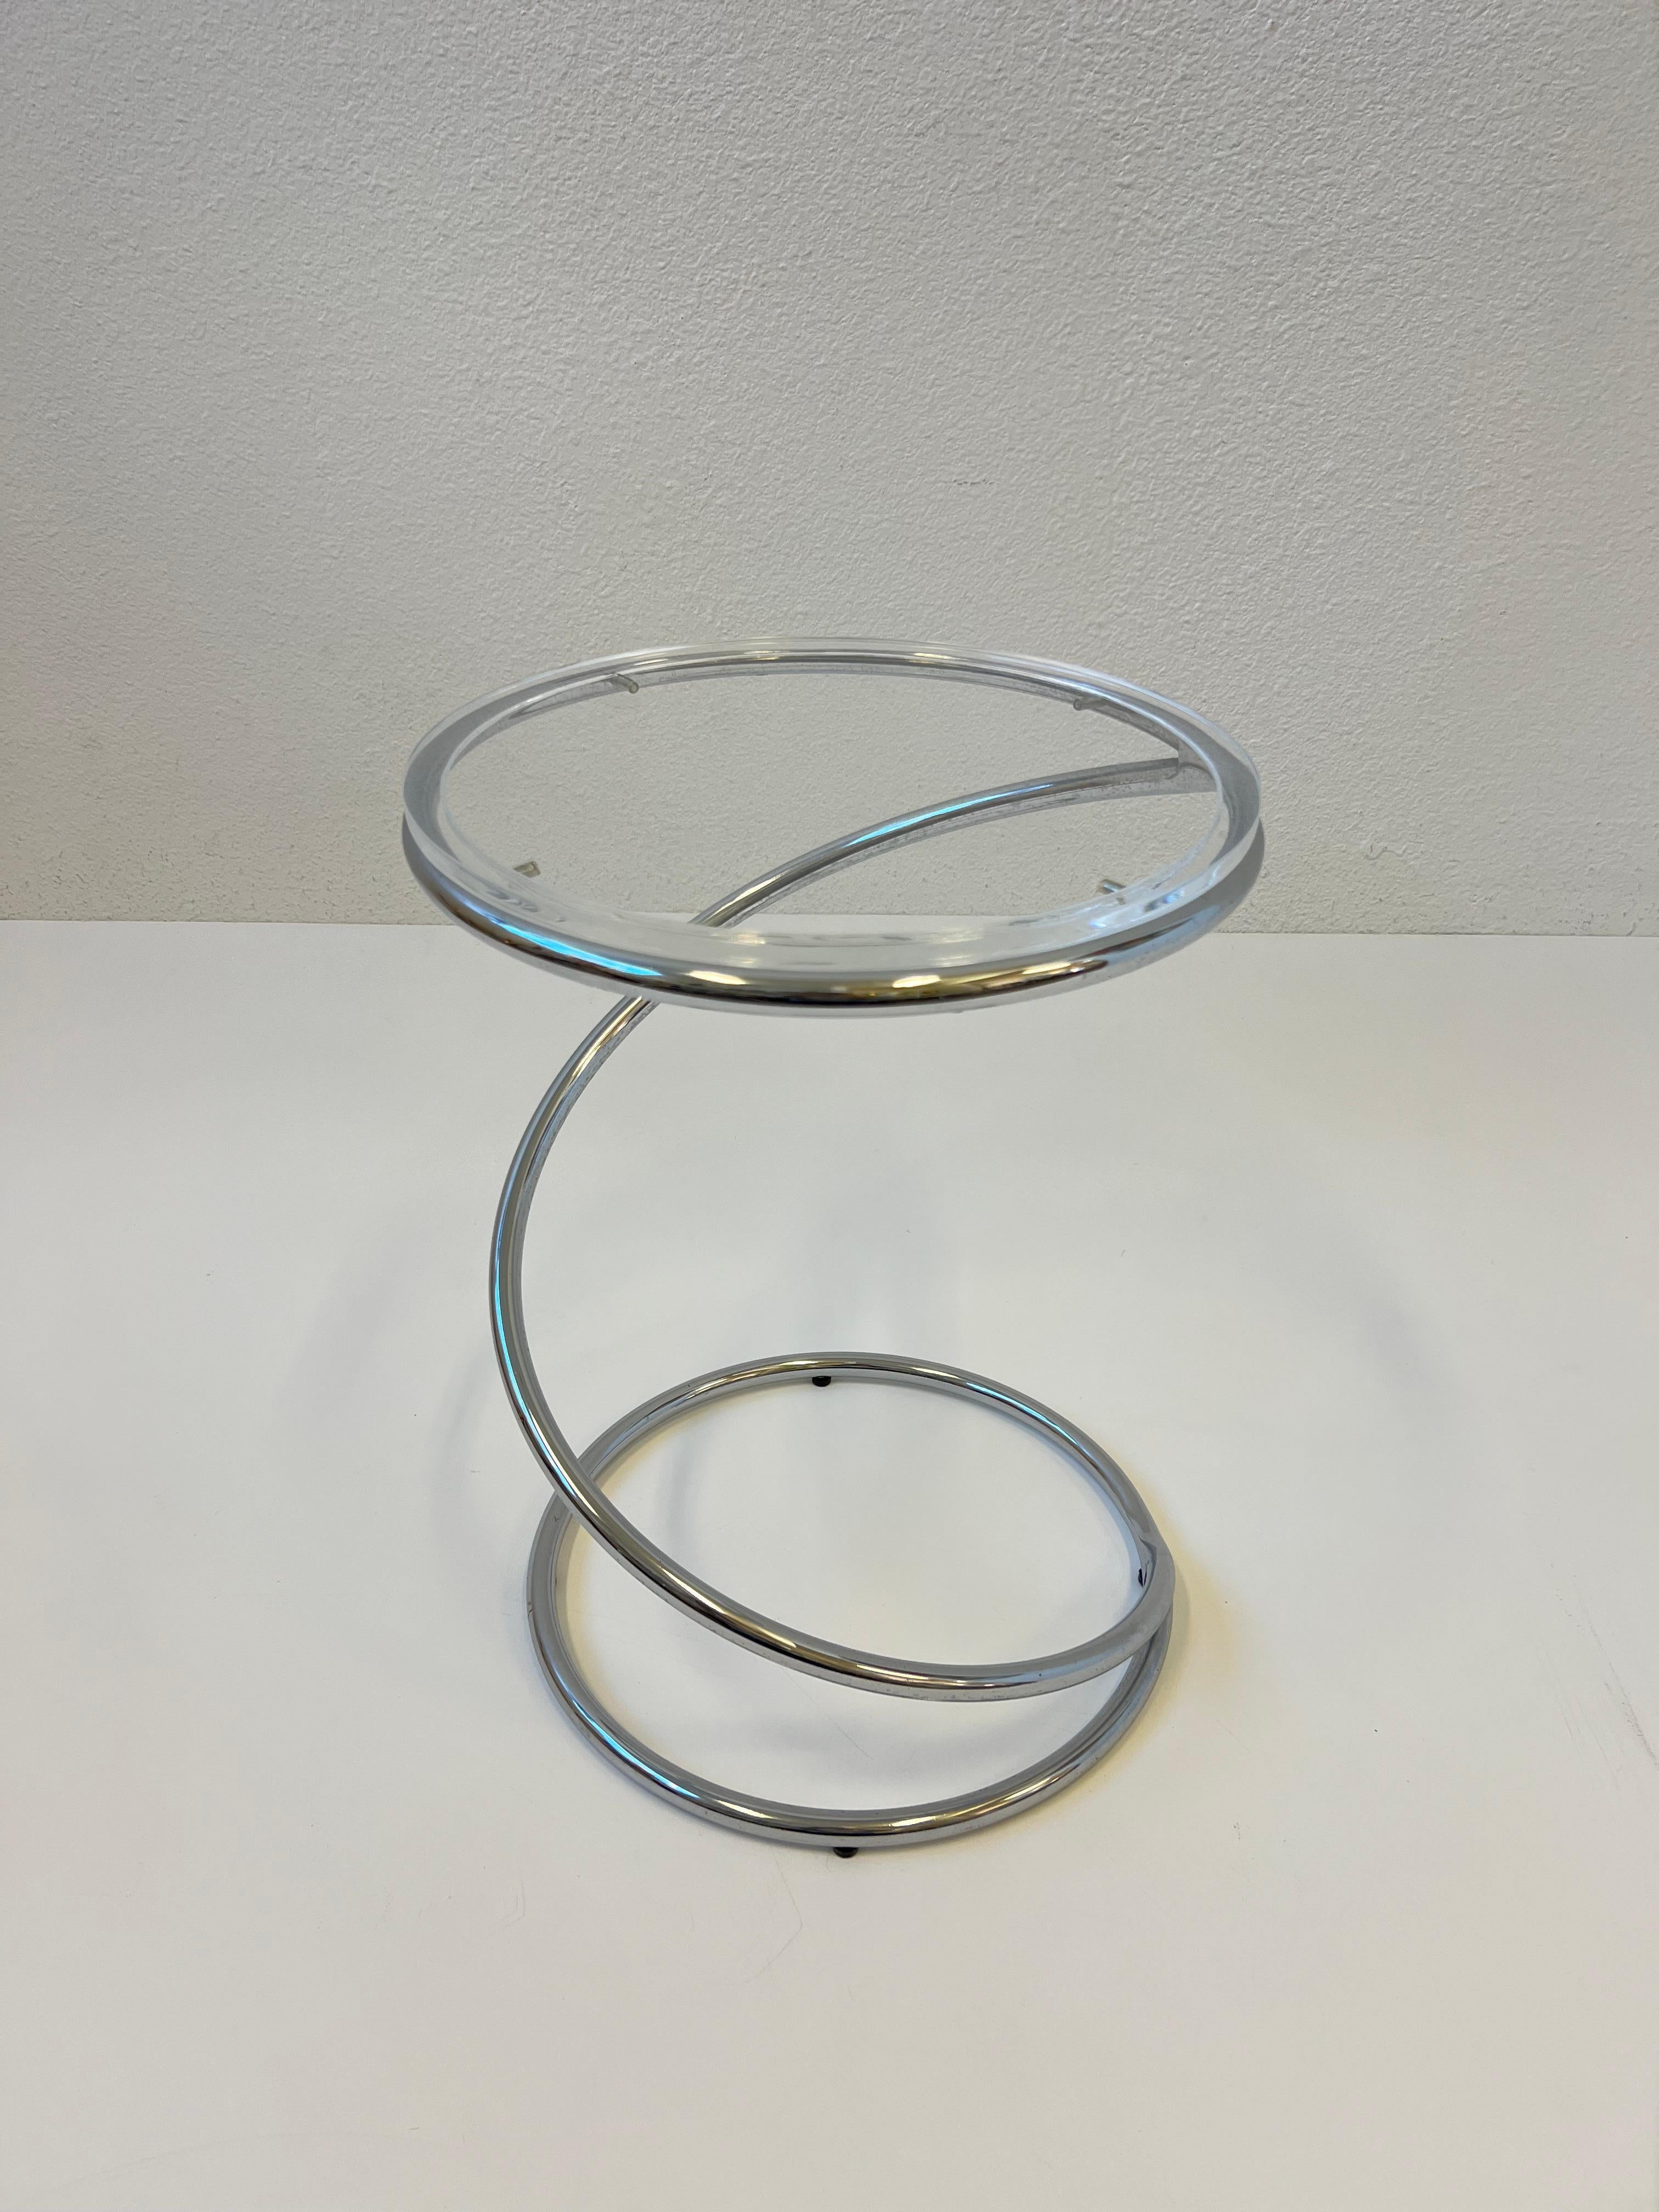 American Polished Chrome and Lucite Spiral Occasional Table by Leon Rosen for Pace For Sale